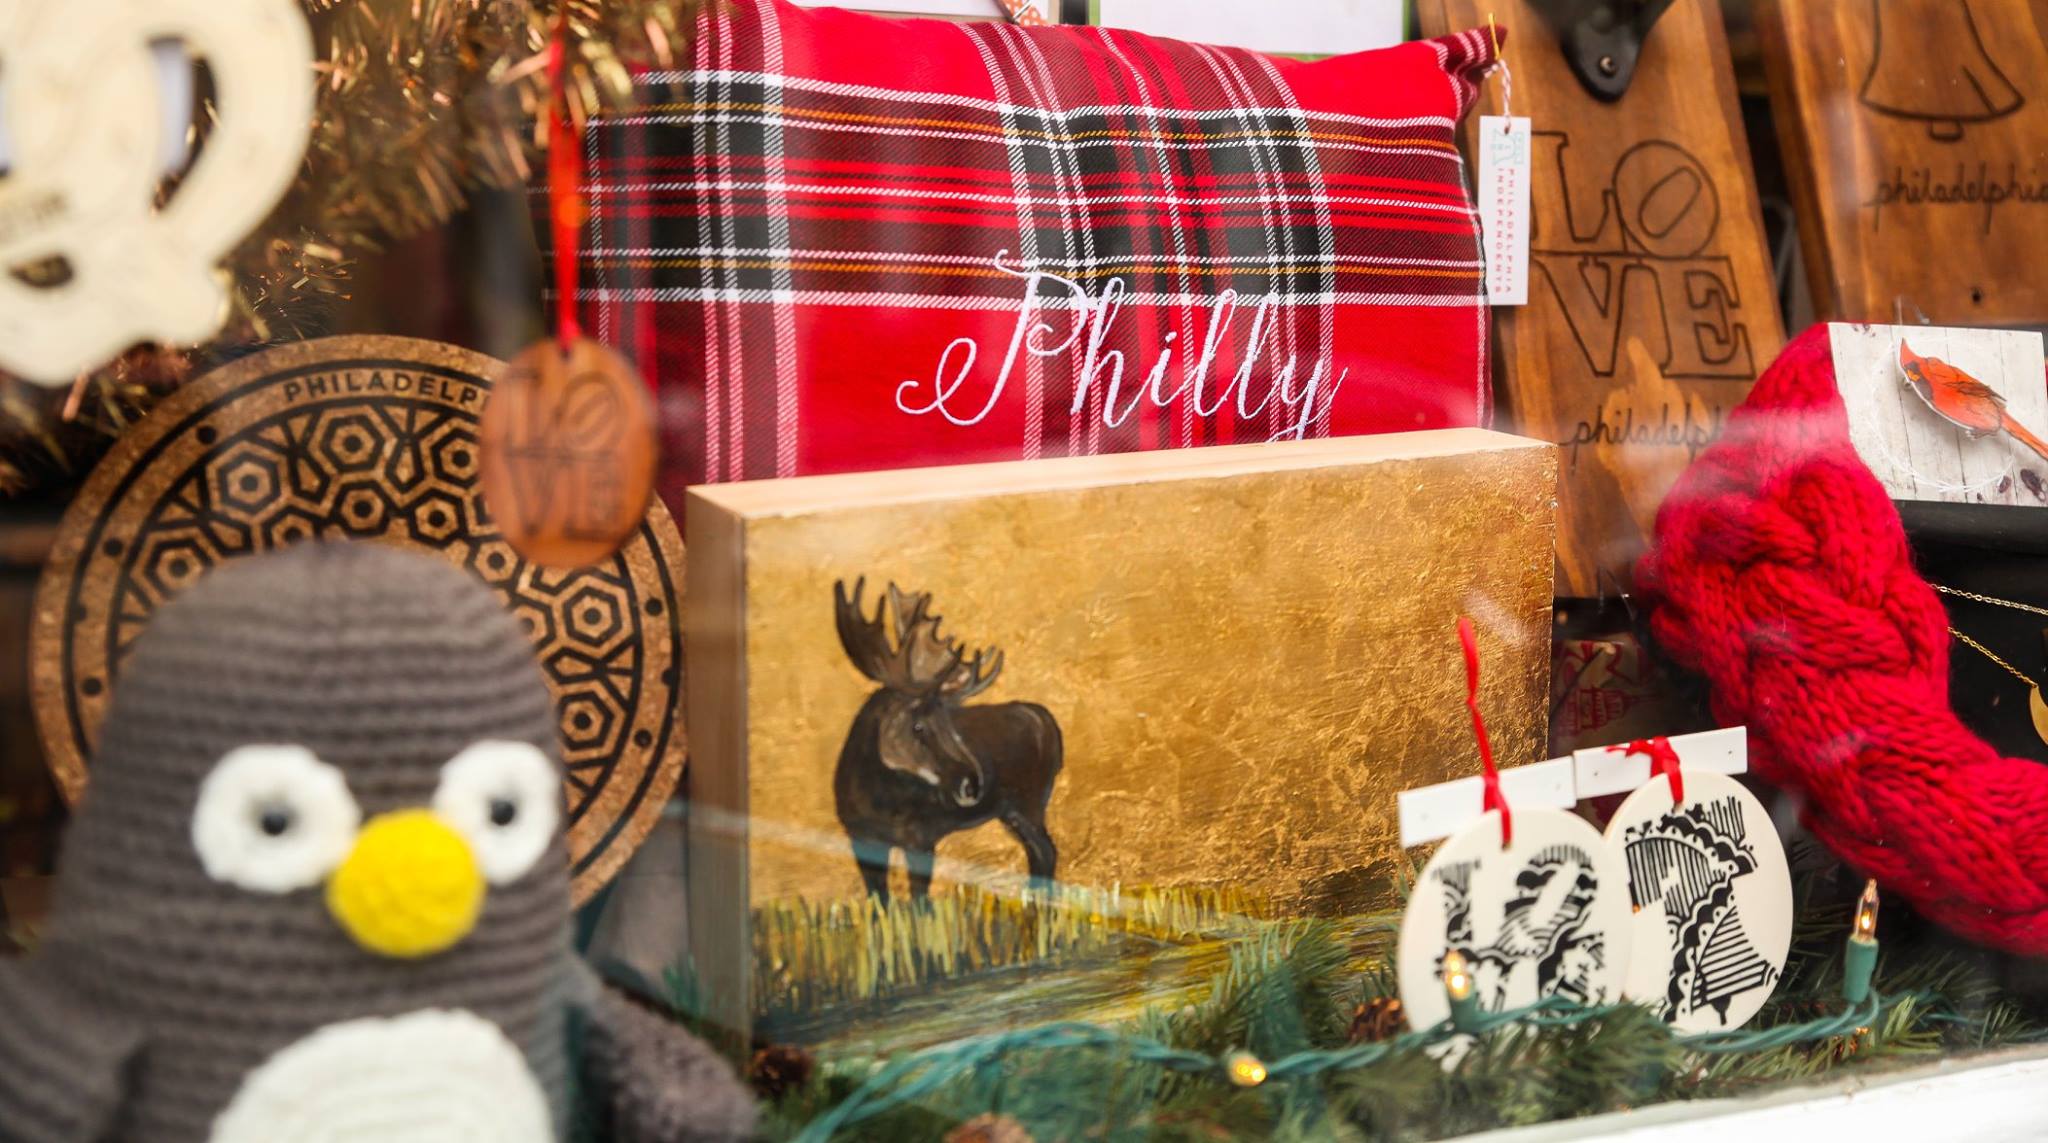 Holiday gifts in display window